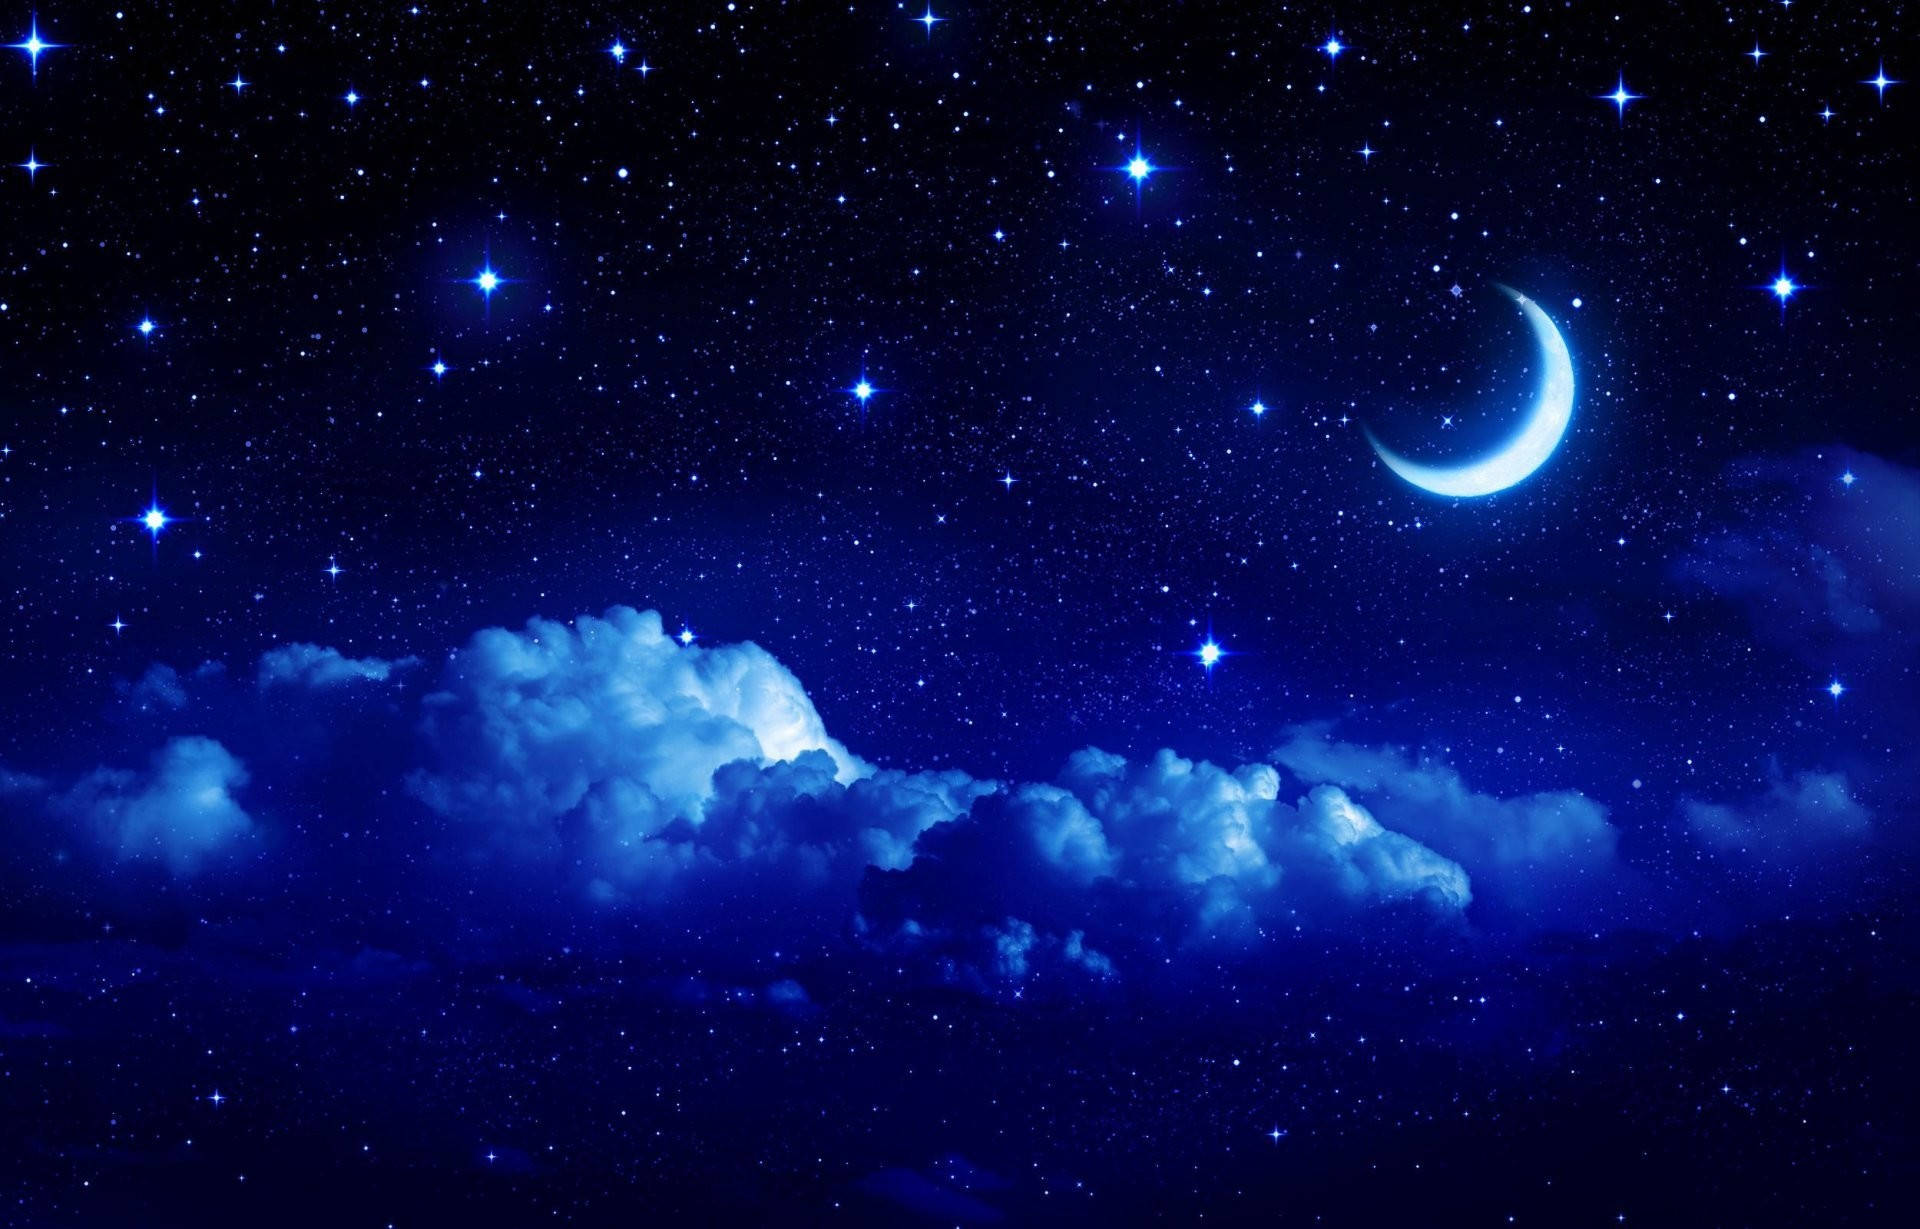 Free Moon And Stars Wallpaper Downloads, [200+] Moon And Stars Wallpapers  for FREE 